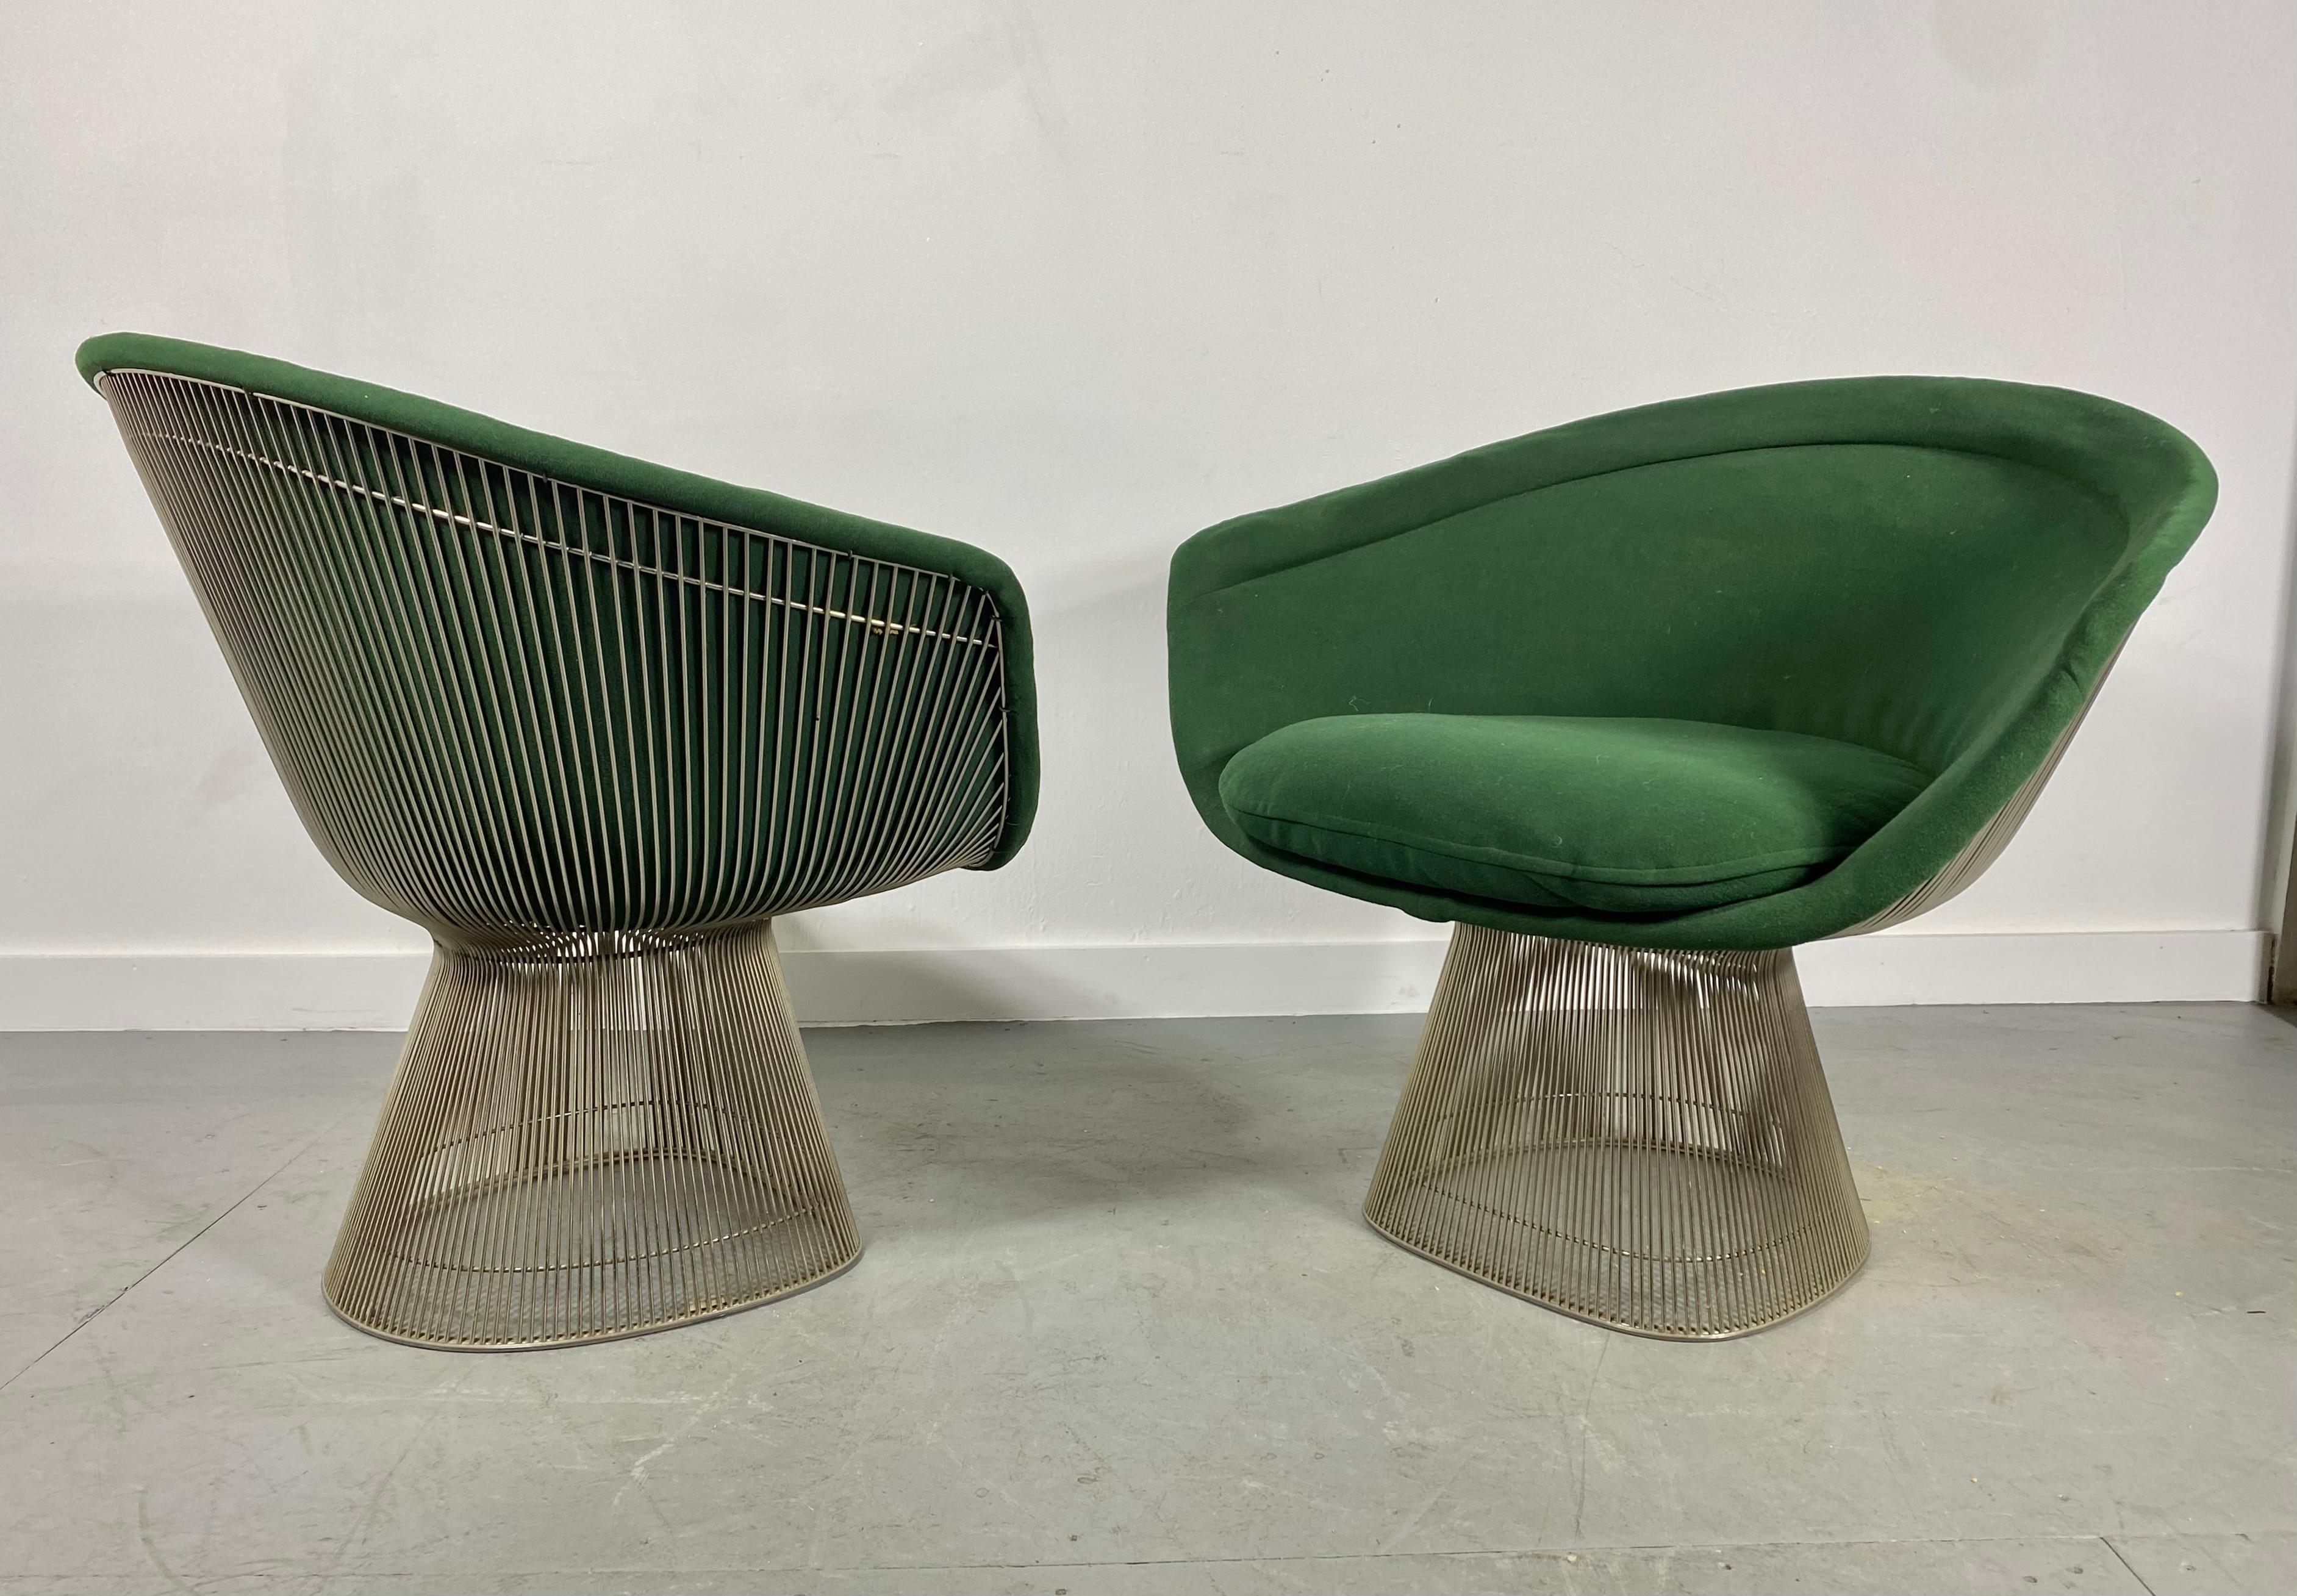 Pair Warren platner lounge chairs. Classic Modernist, manufactured by Knoll. Nice original condition. Retains original green wool knoll fabric, minor spots and fading. Also retains original Knoll labels, dated 1974. Great example of classic